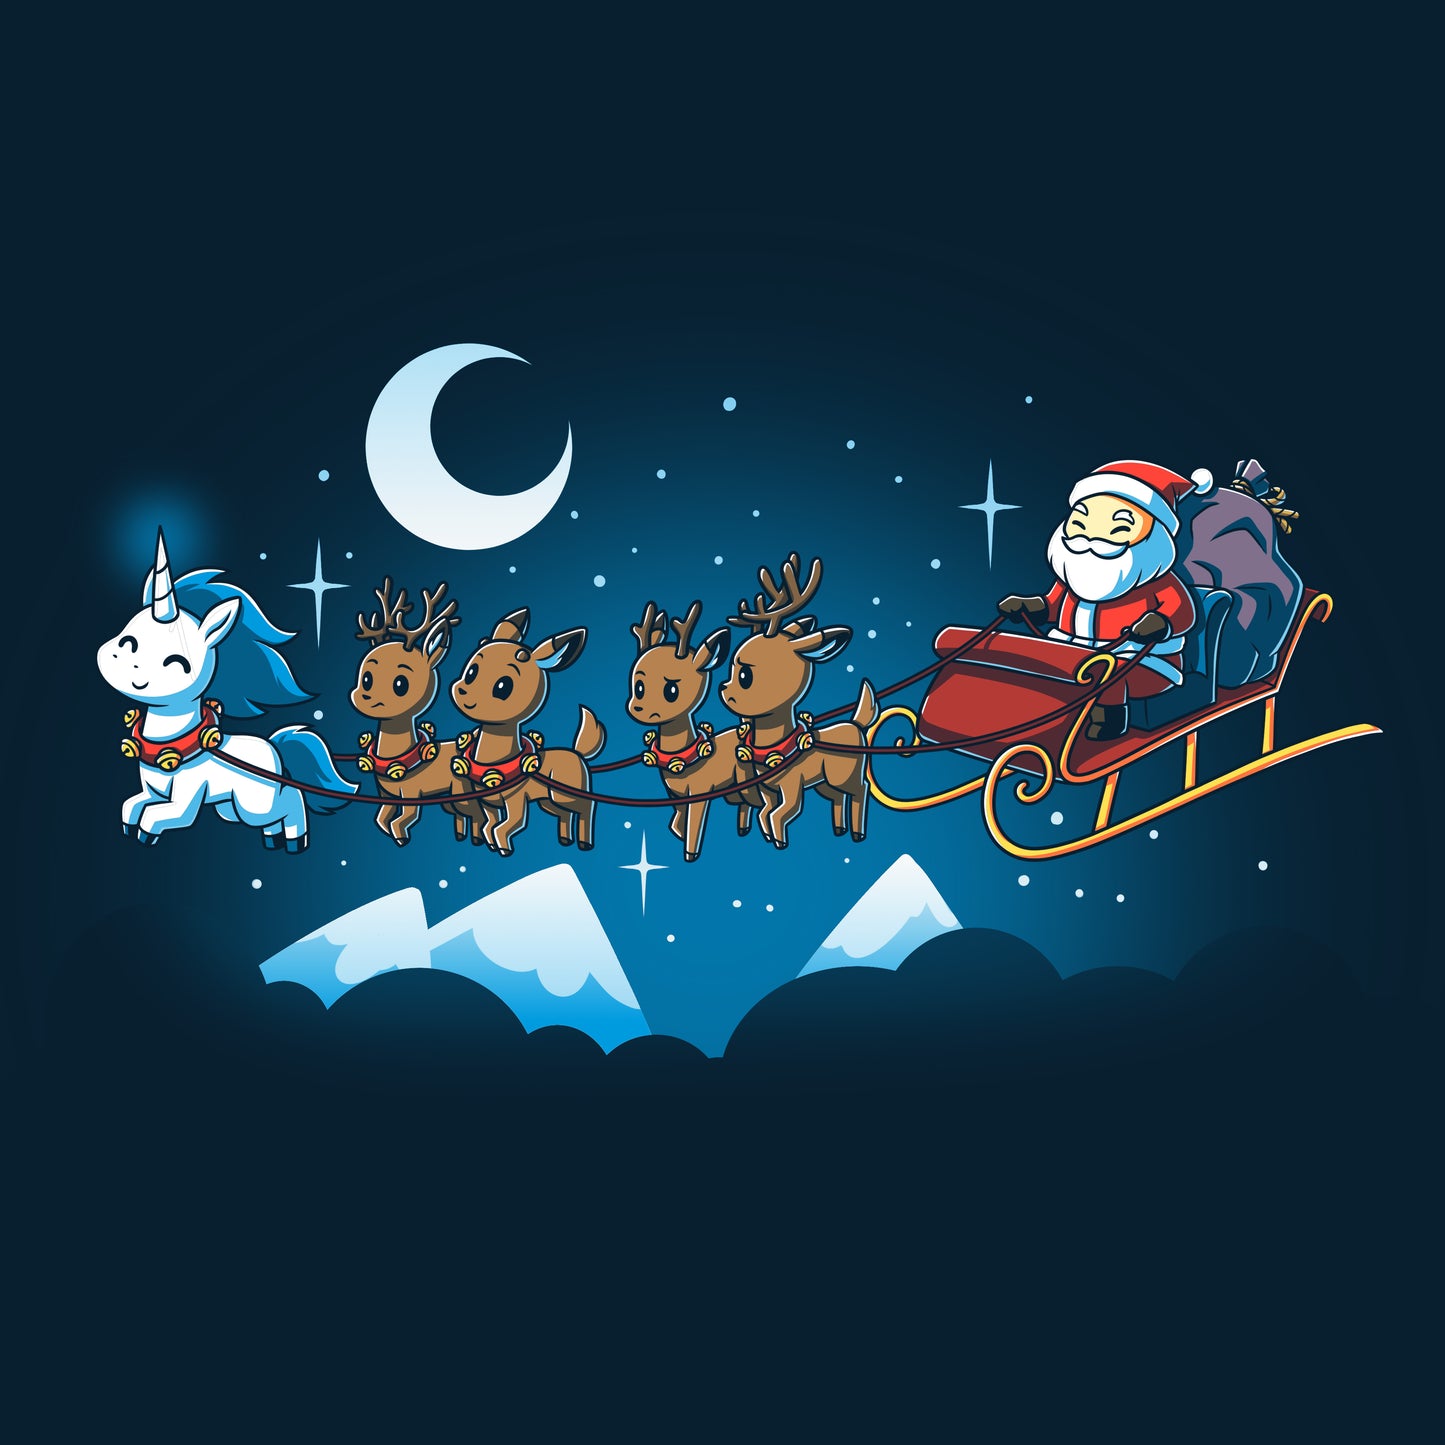 Santa Claus and his reindeer zoom across the night sky in a navy blue sleigh, spreading holiday cheer. Whether printed on a t-shirt or depicted as Santa's Favorite Unicorn by TeeTurtle, this whimsical scene captures the.